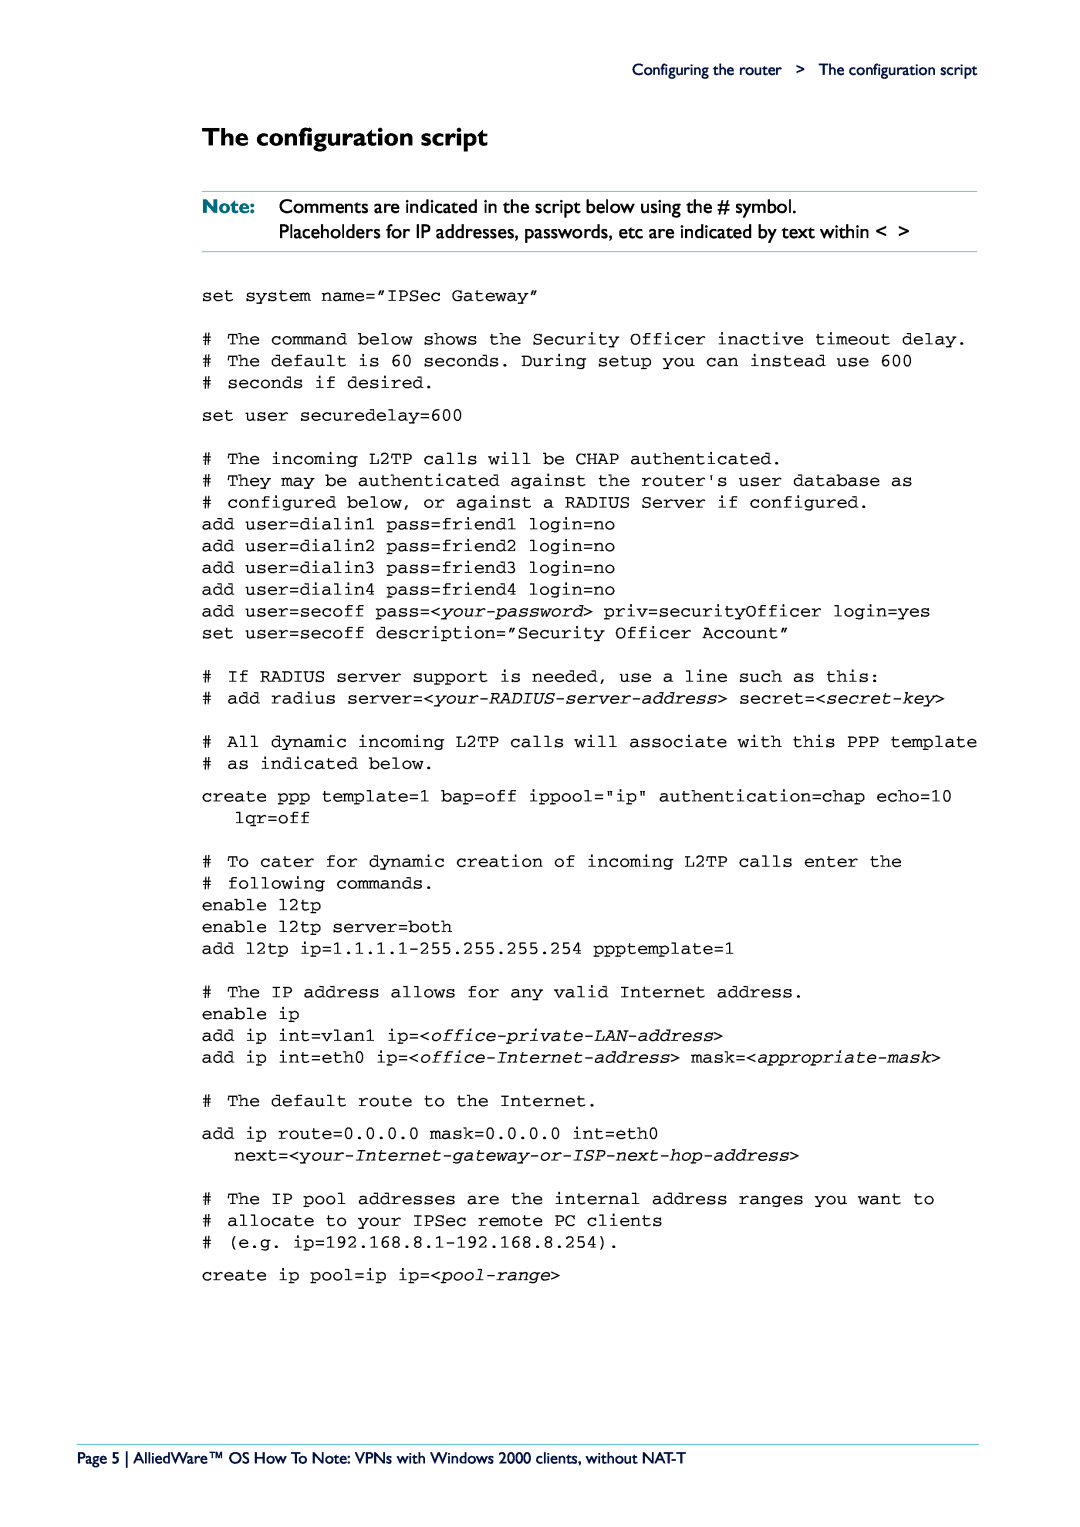 Allied Telesis VPN manual The configuration script, Note Comments are indicated in the script below using the # symbol 